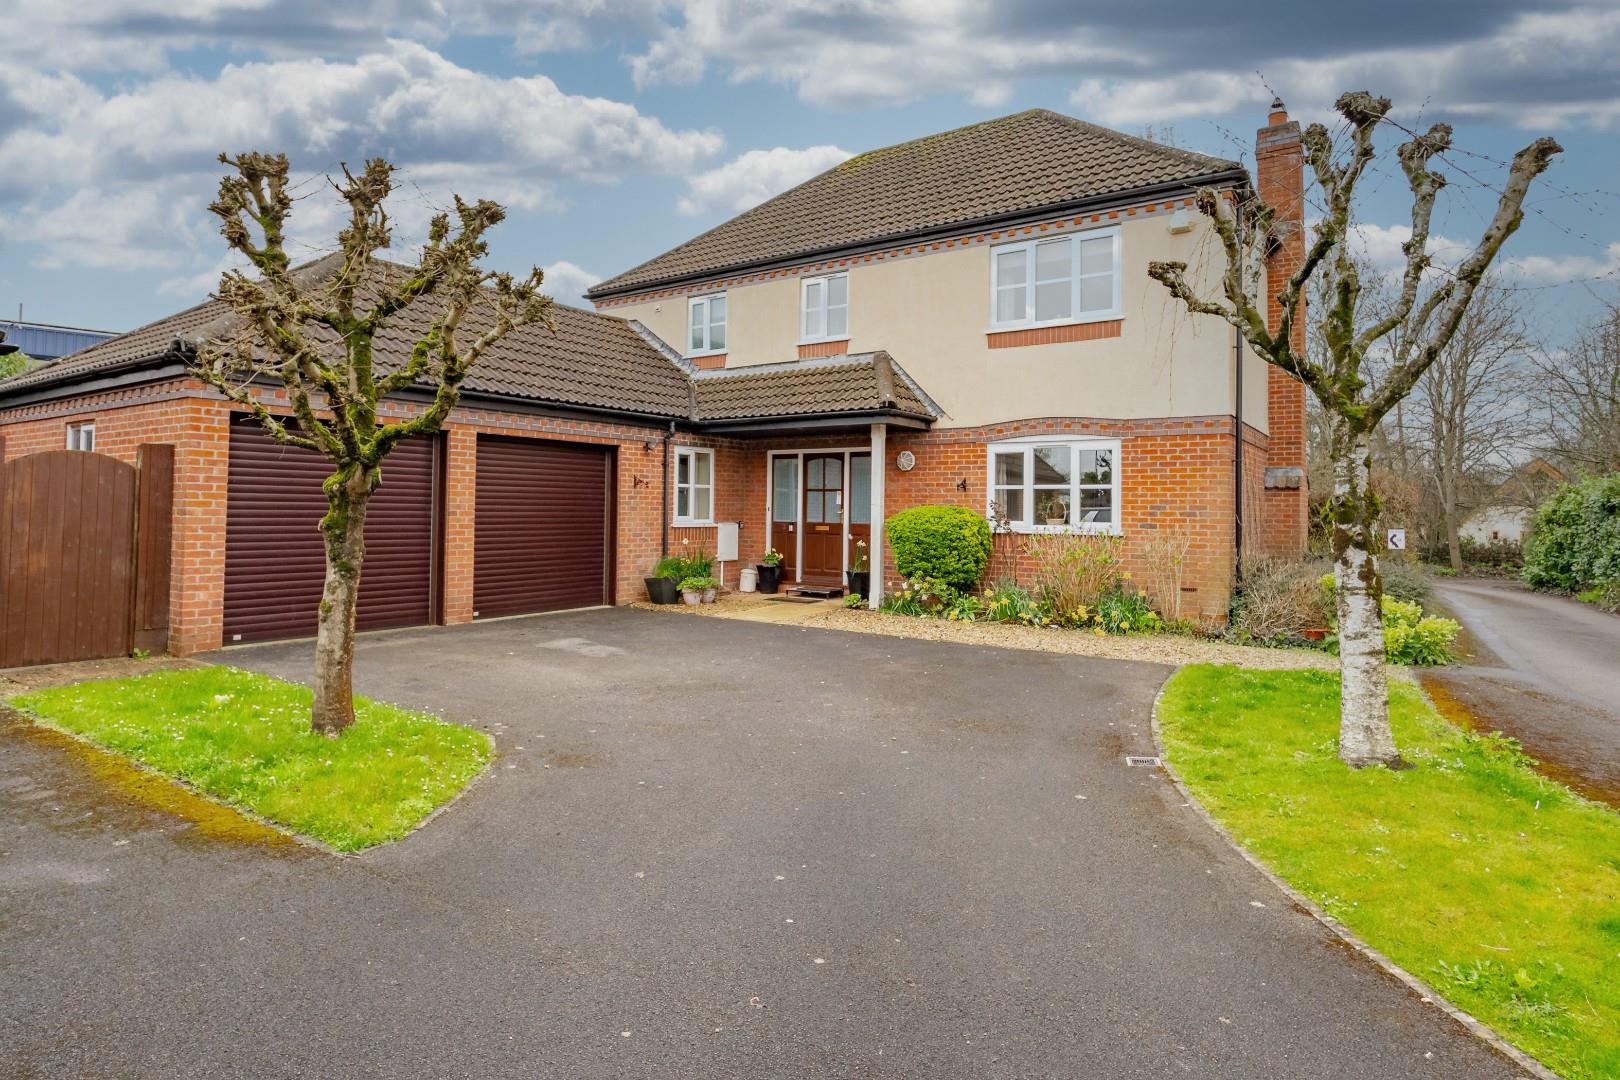 Executive family home situated within a popular cul de sac in Yatton's North End